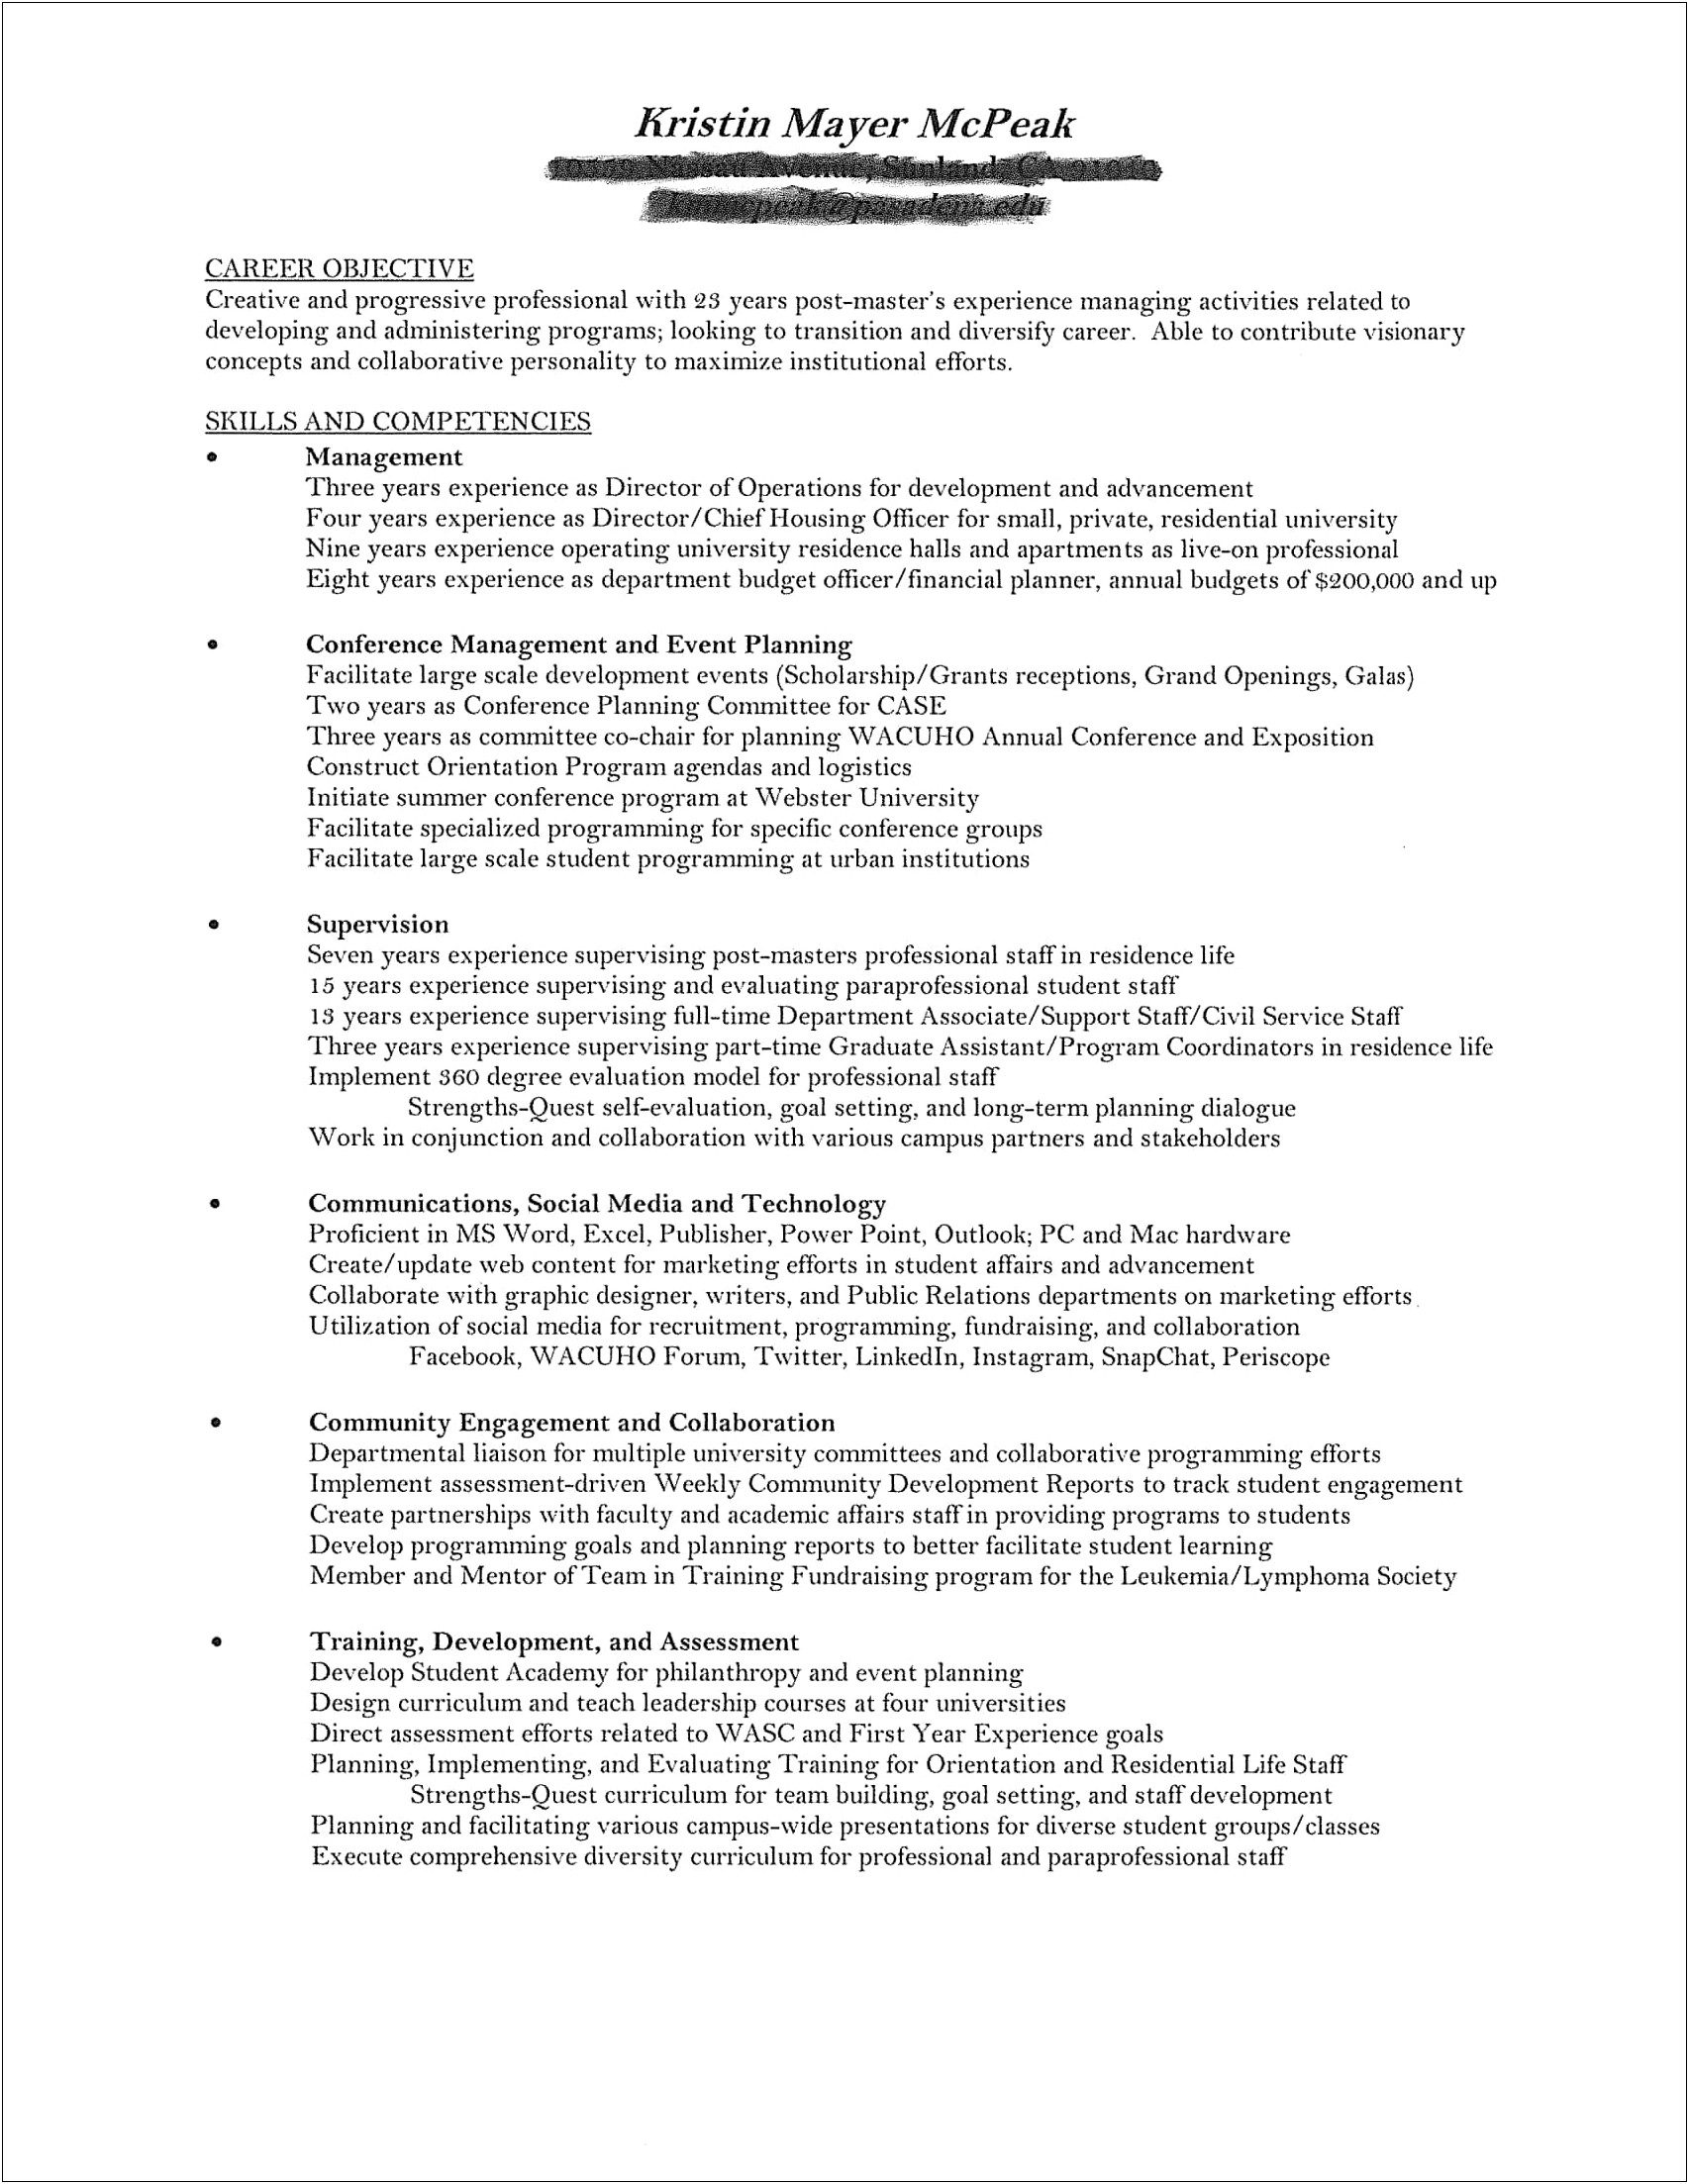 Resume Object For Student Scholarship Application